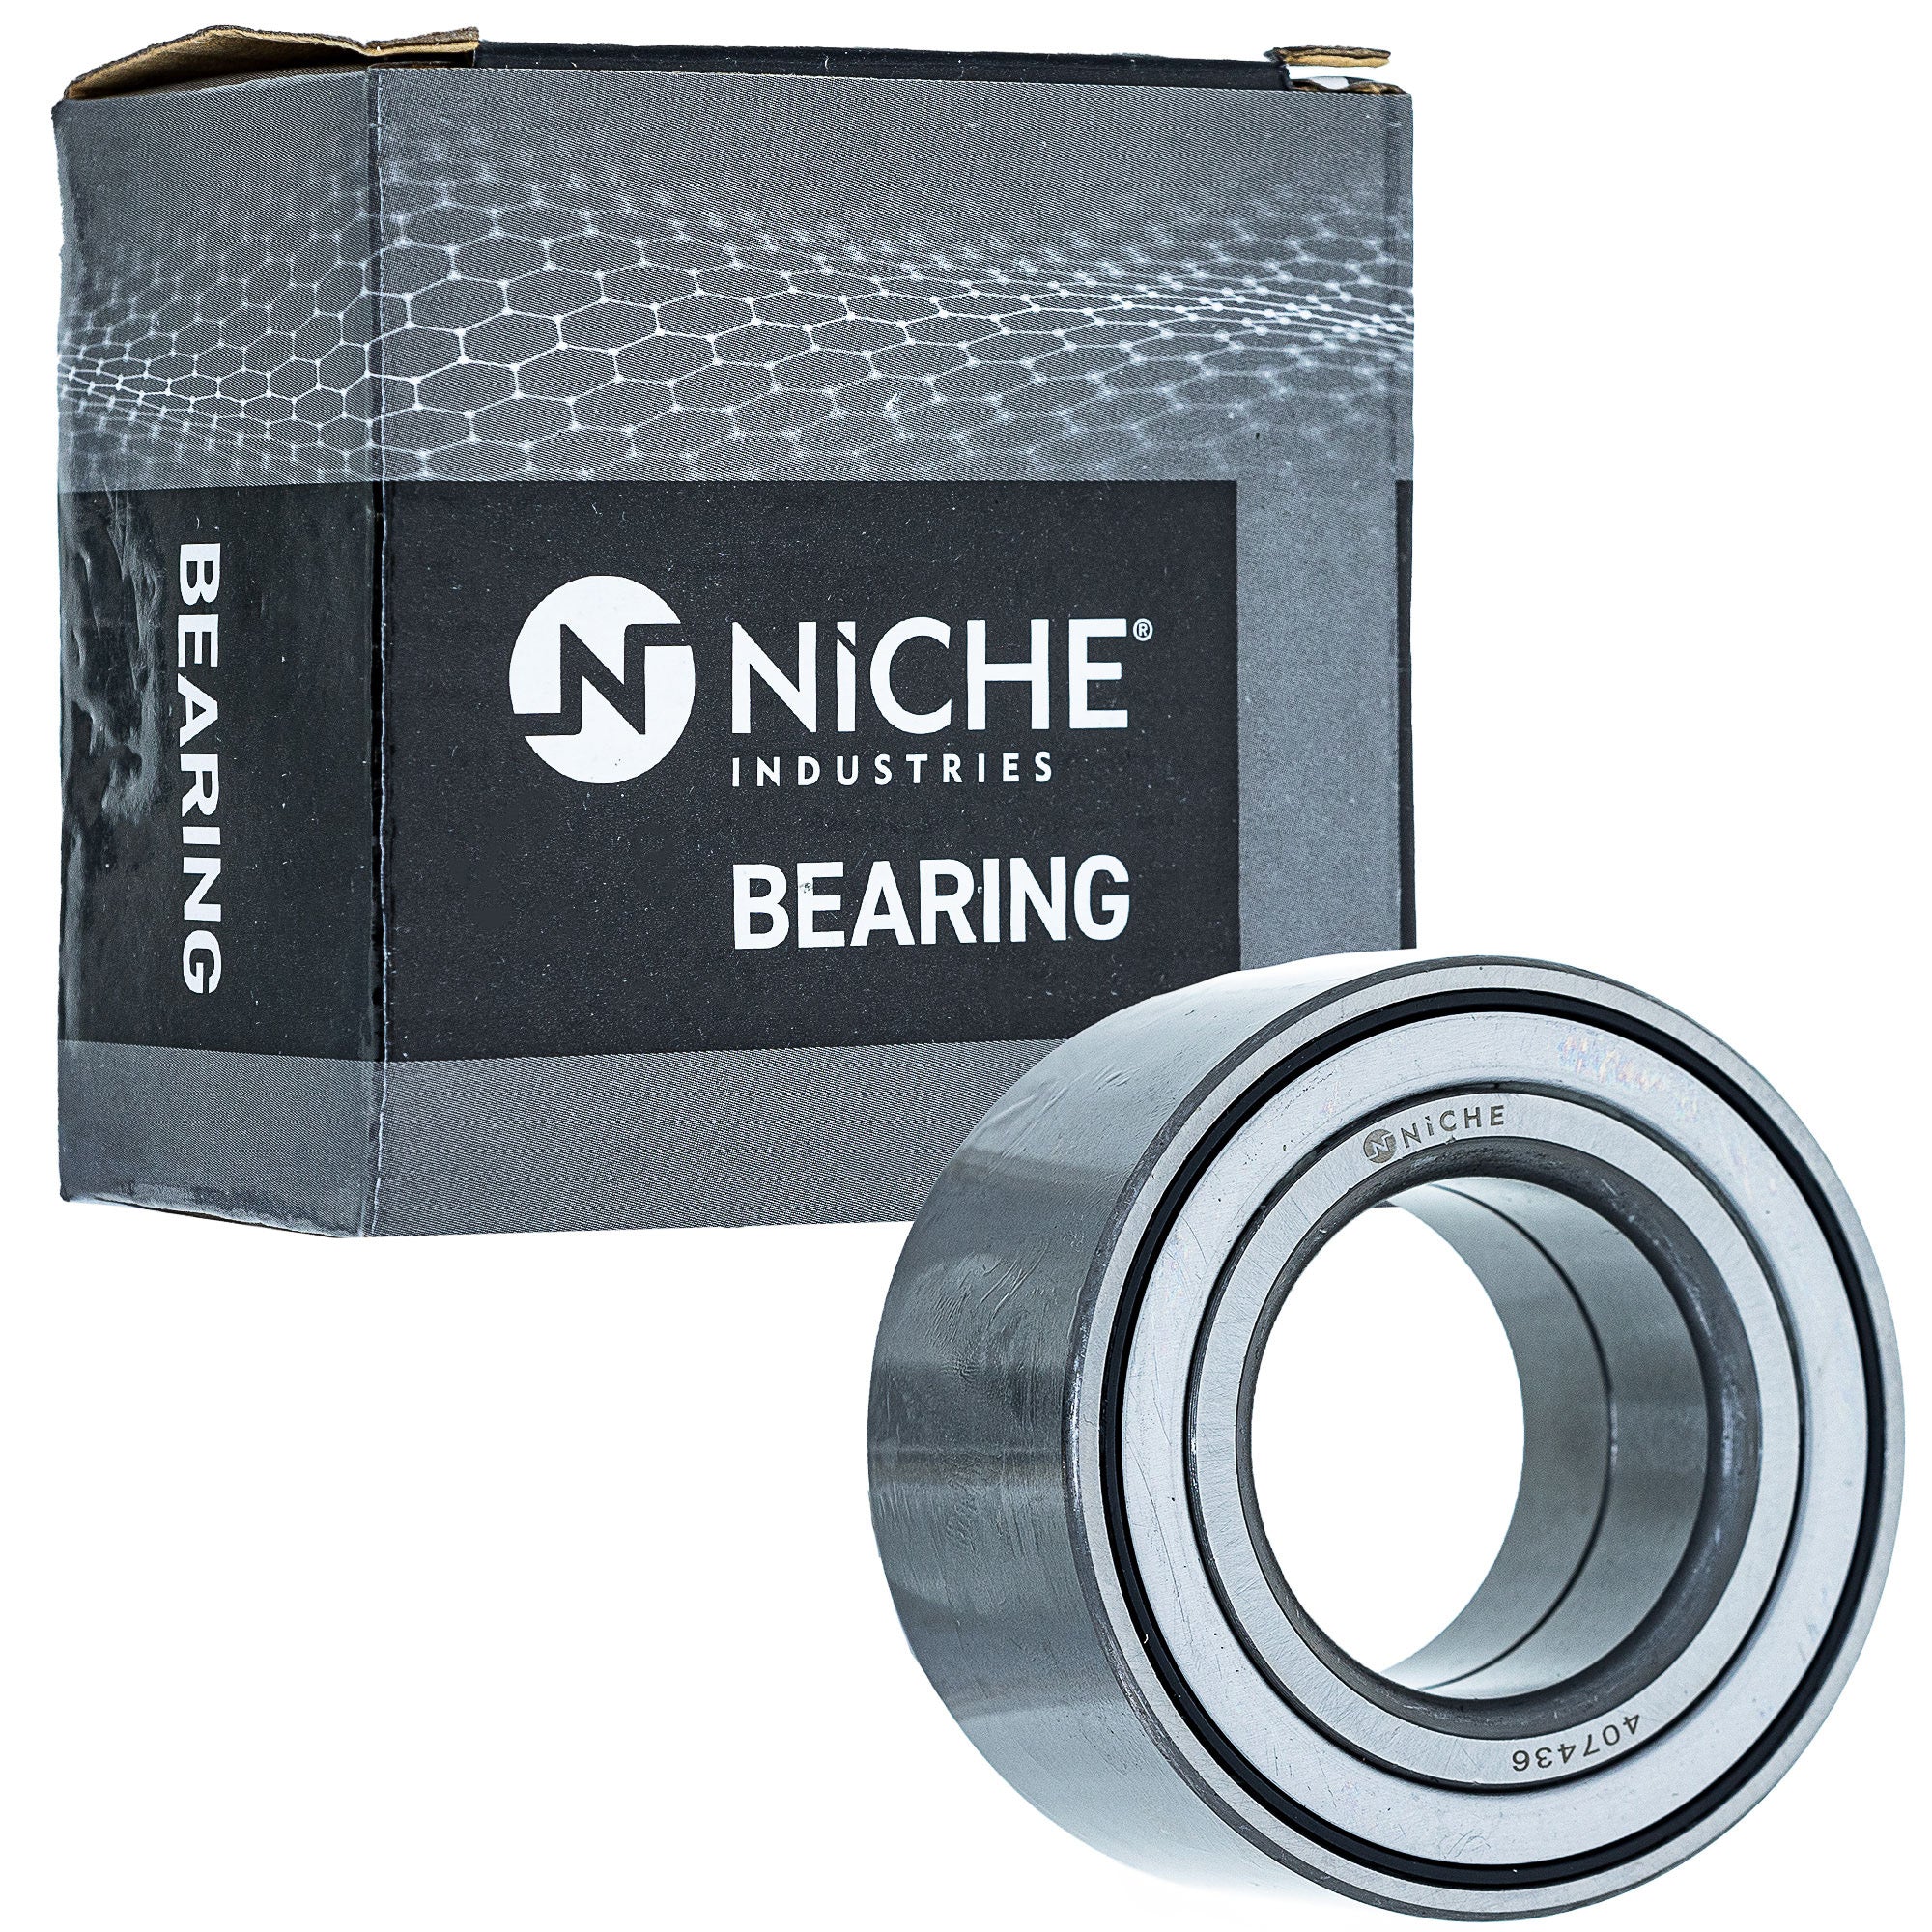 NICHE 519-CBB2291R Bearing 10-Pack for zOTHER